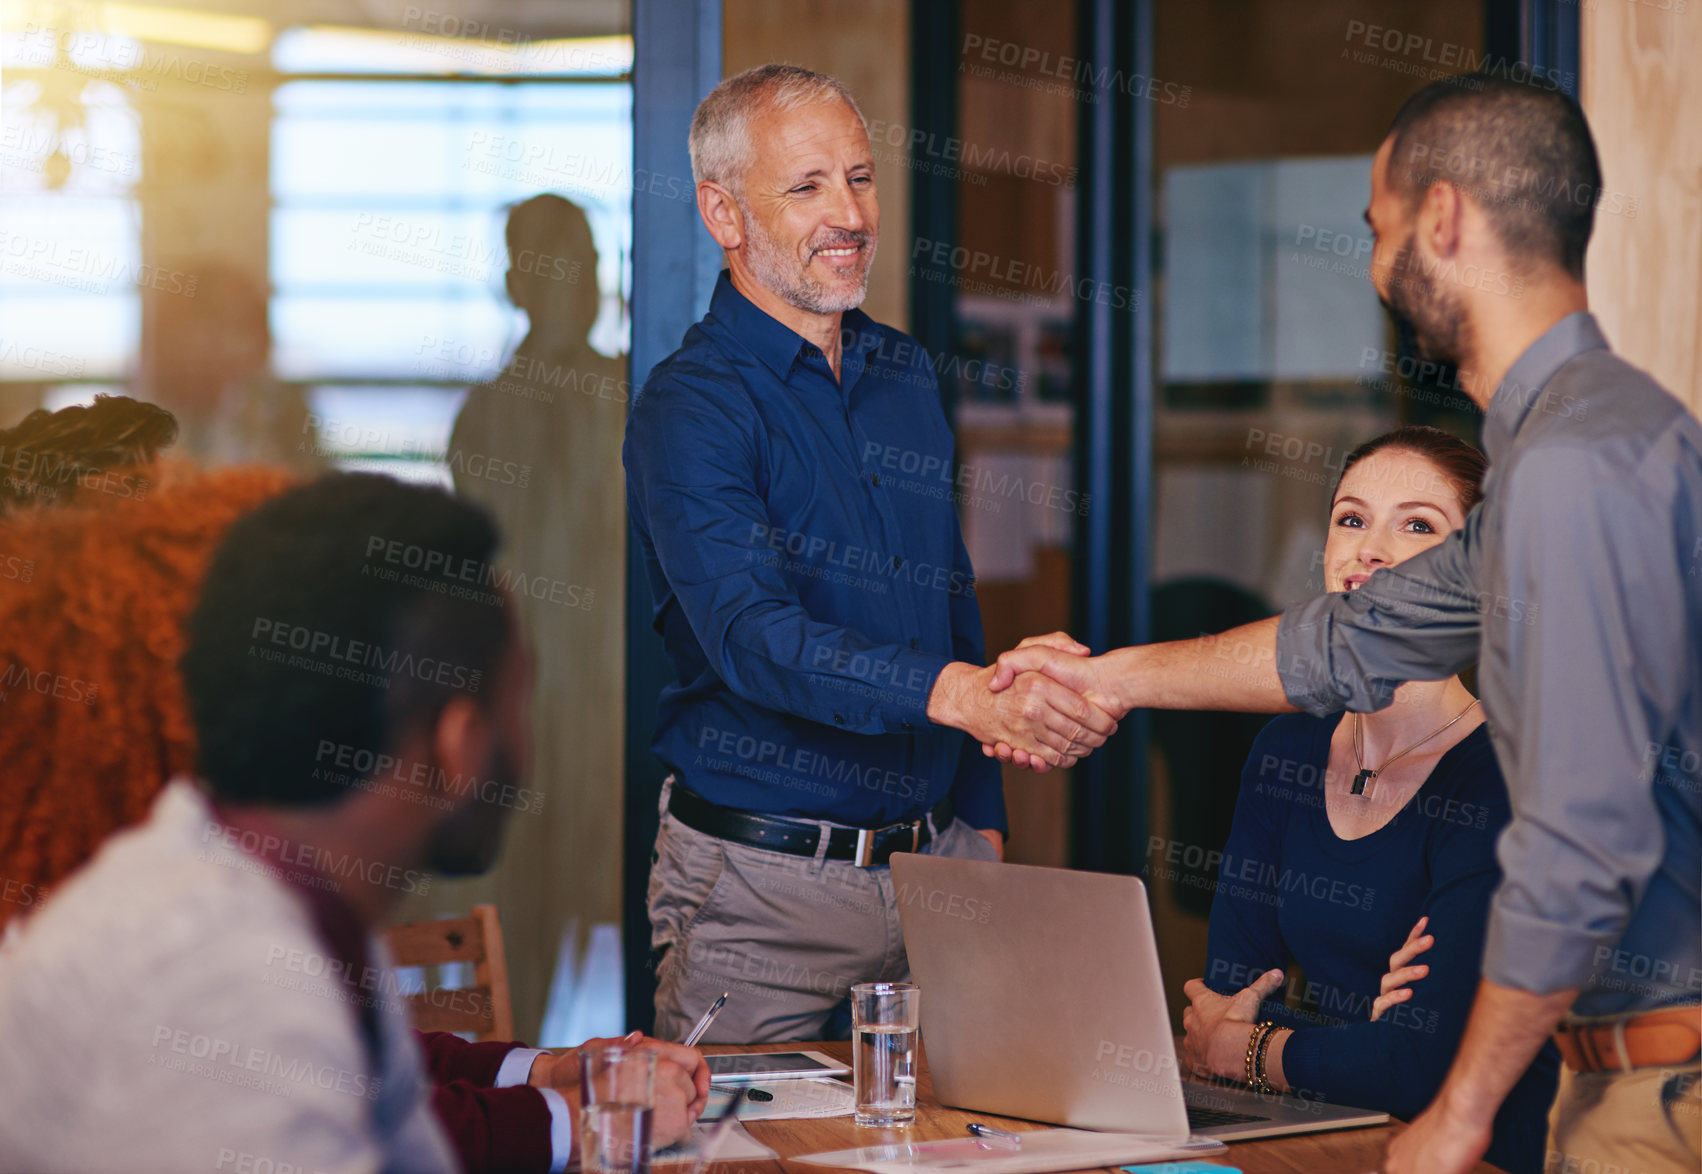 Buy stock photo Shot of colleagues shaking hands in an office meeting